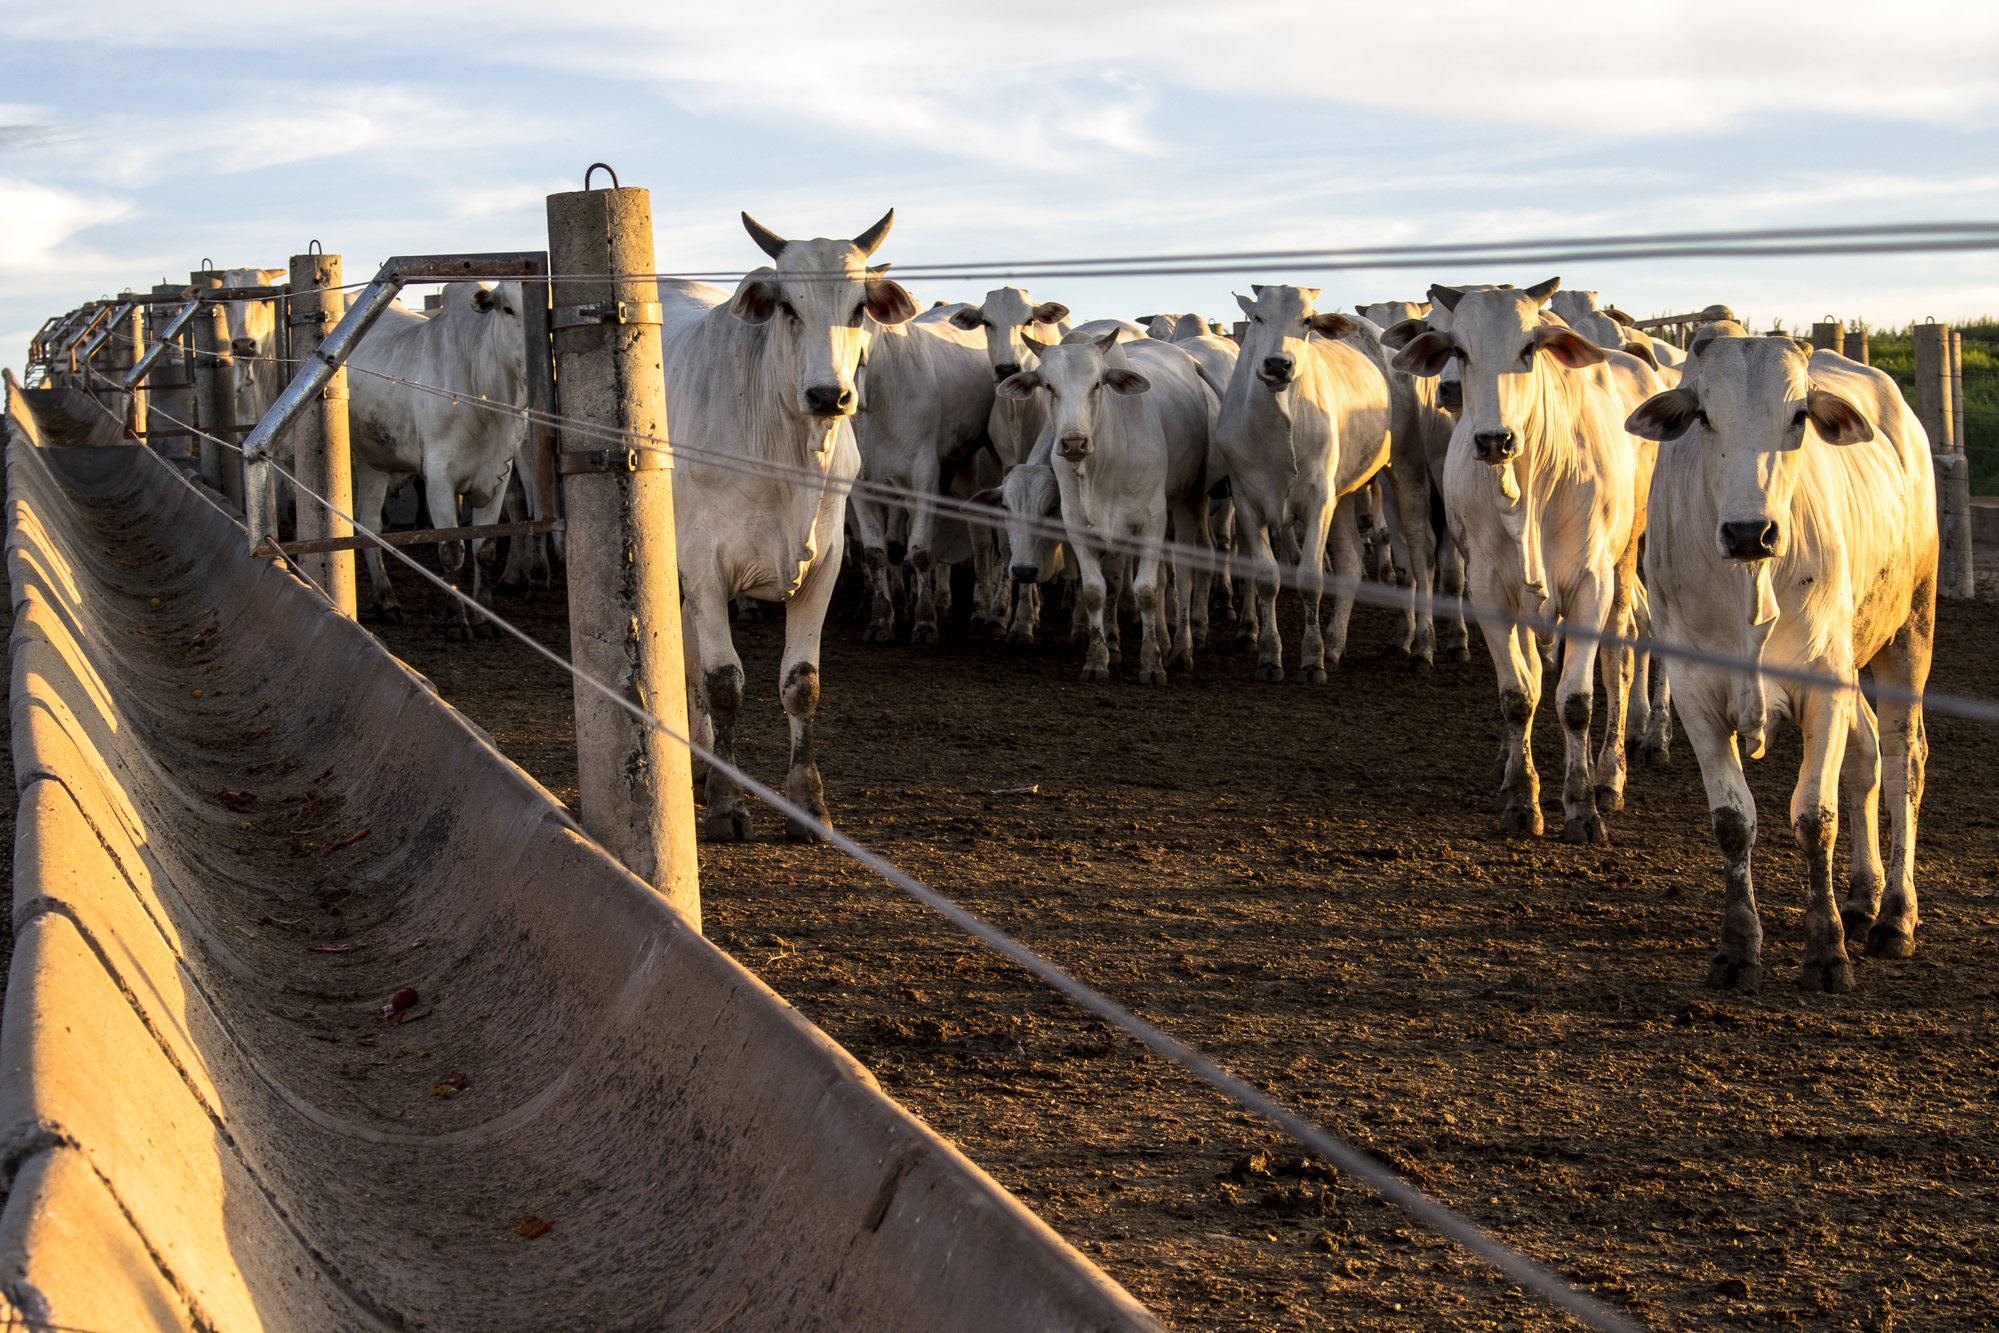 A group of cattle in confinement in Brazil